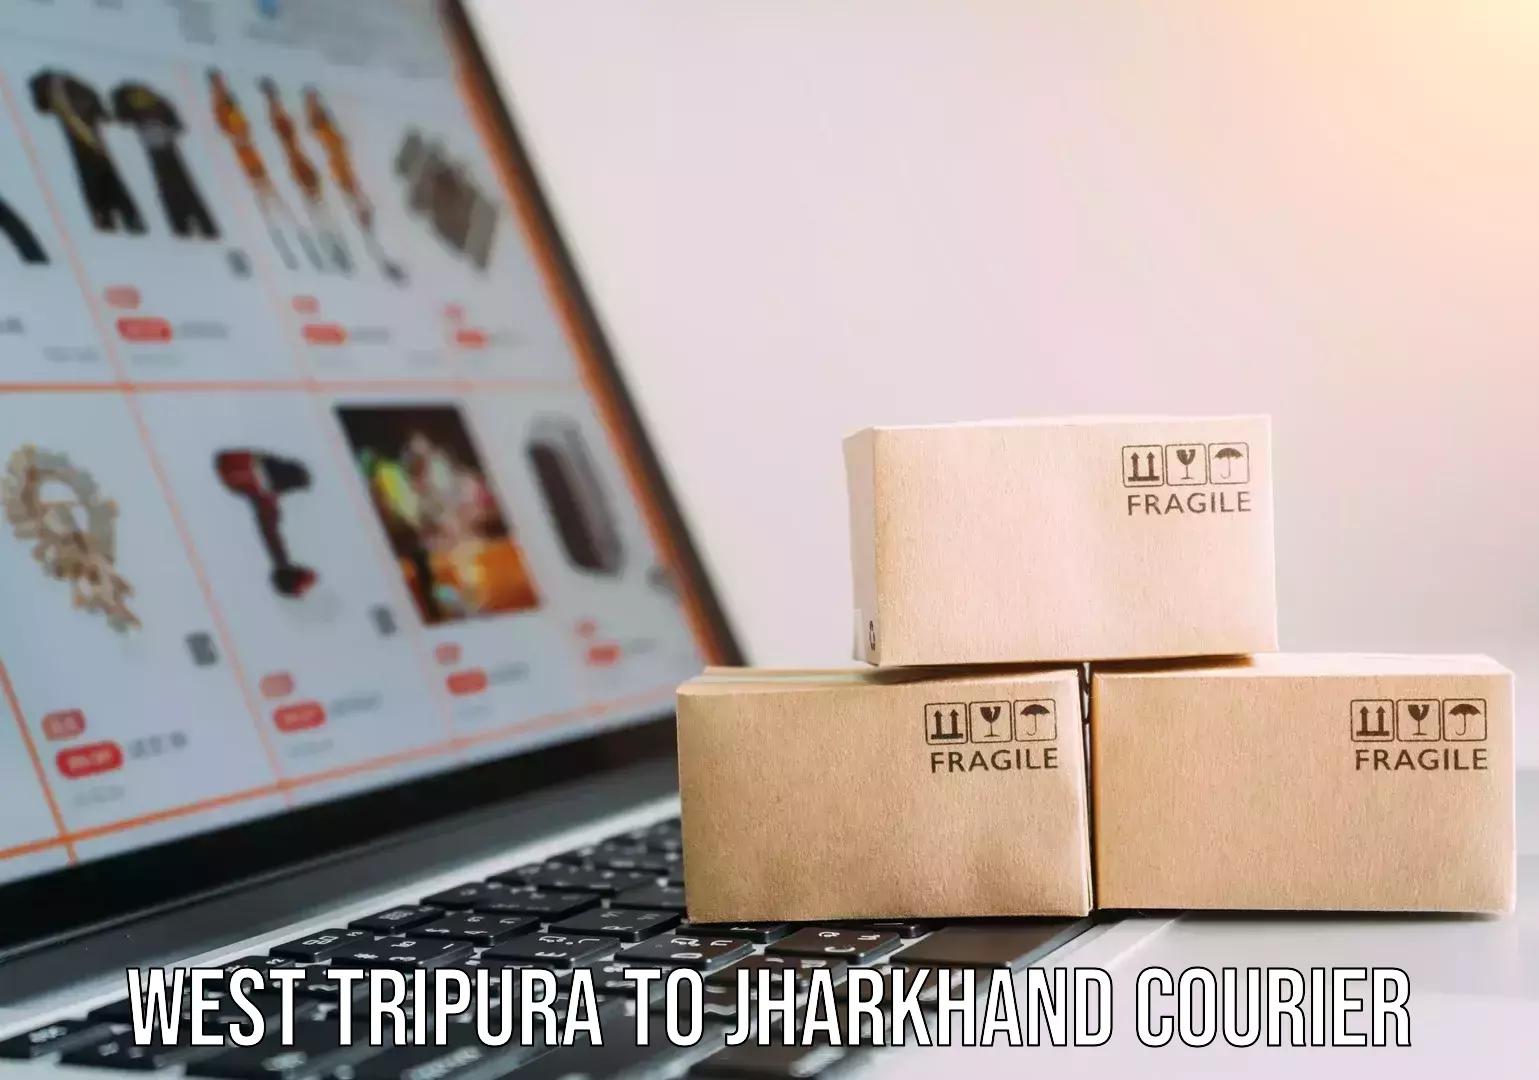 Fragile item shipping West Tripura to Jharkhand